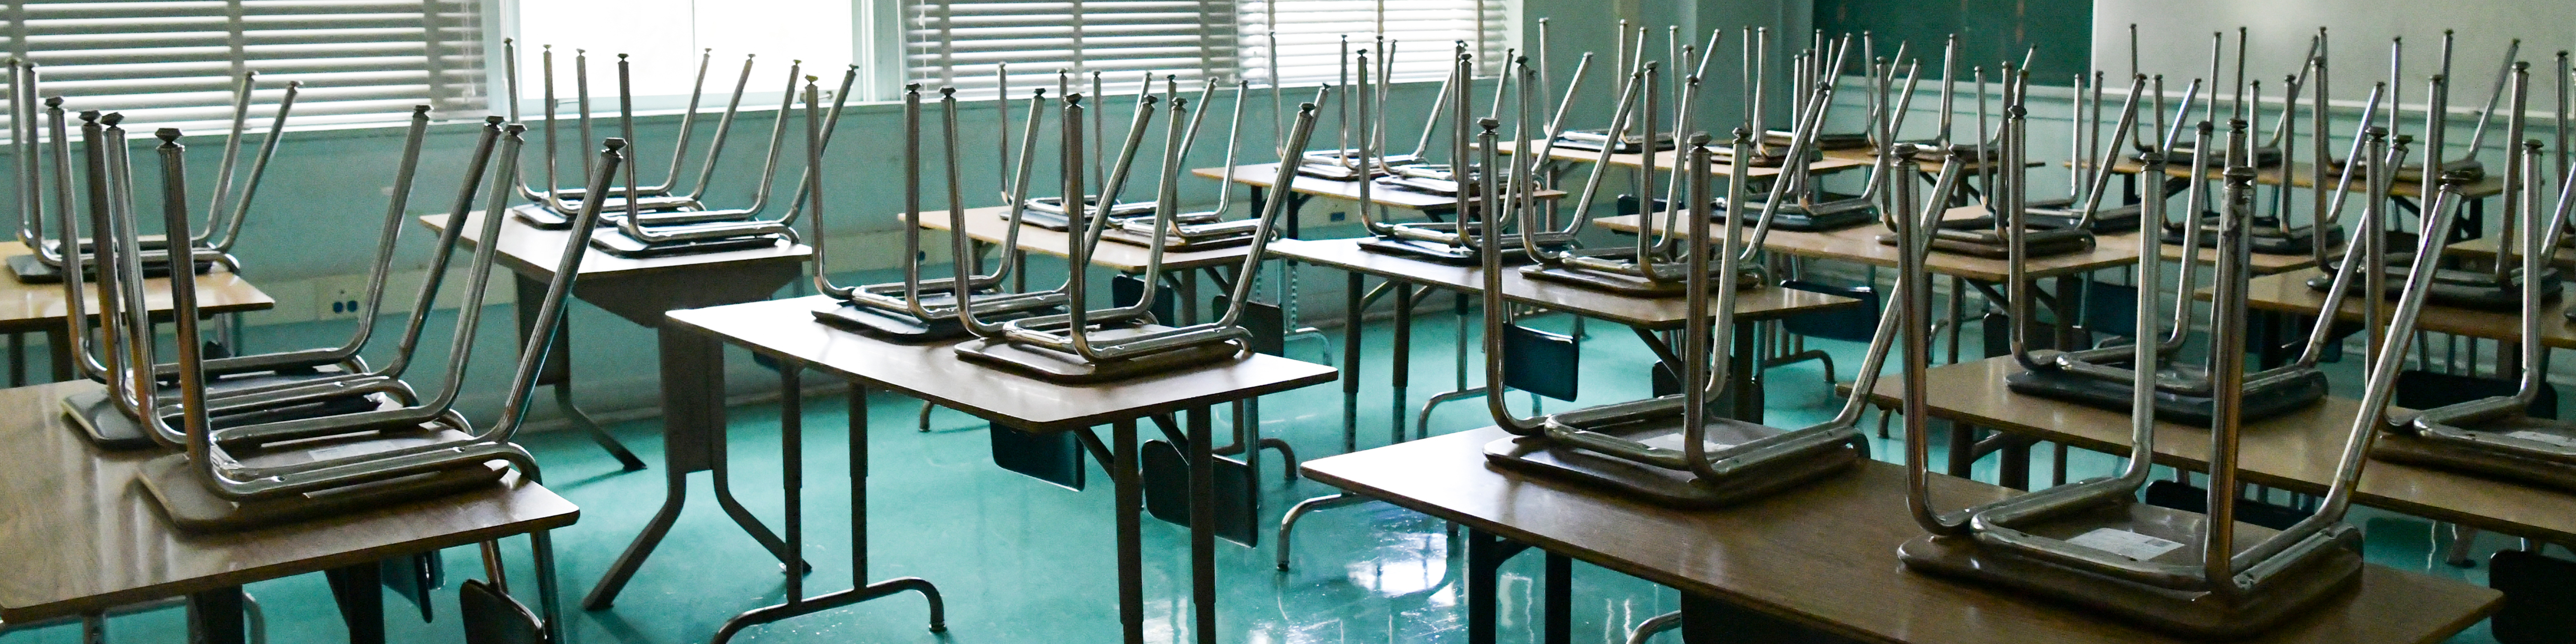 an empty classroom with chairs on top of desks